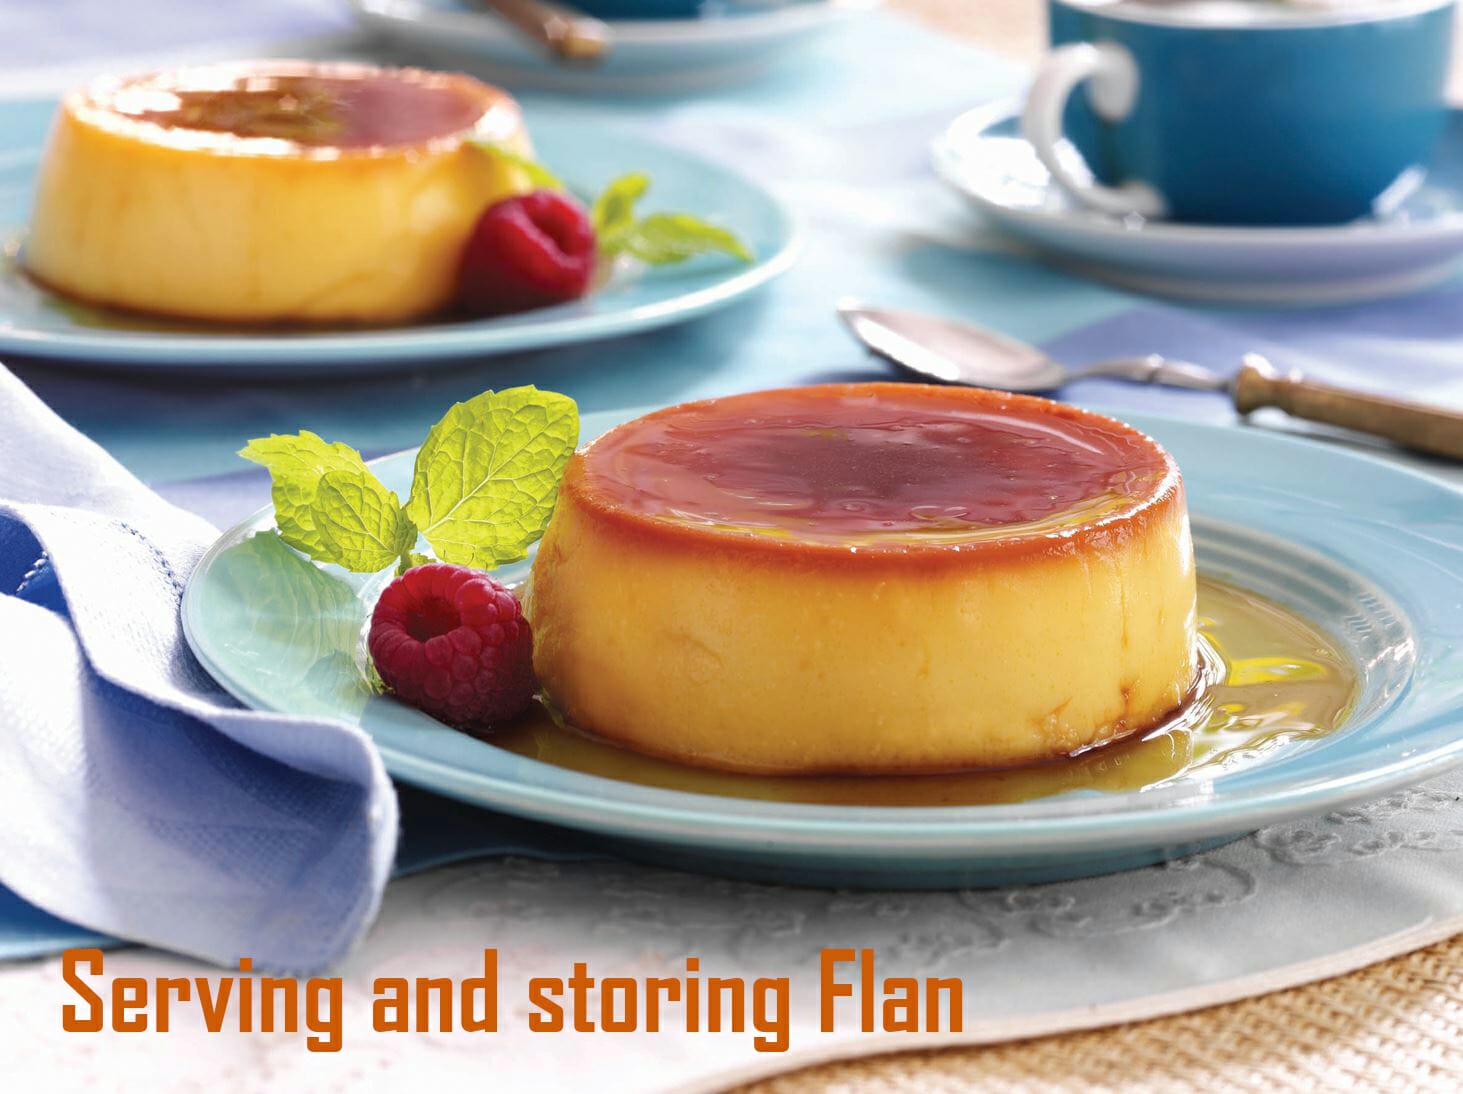 Serving and storing Flan